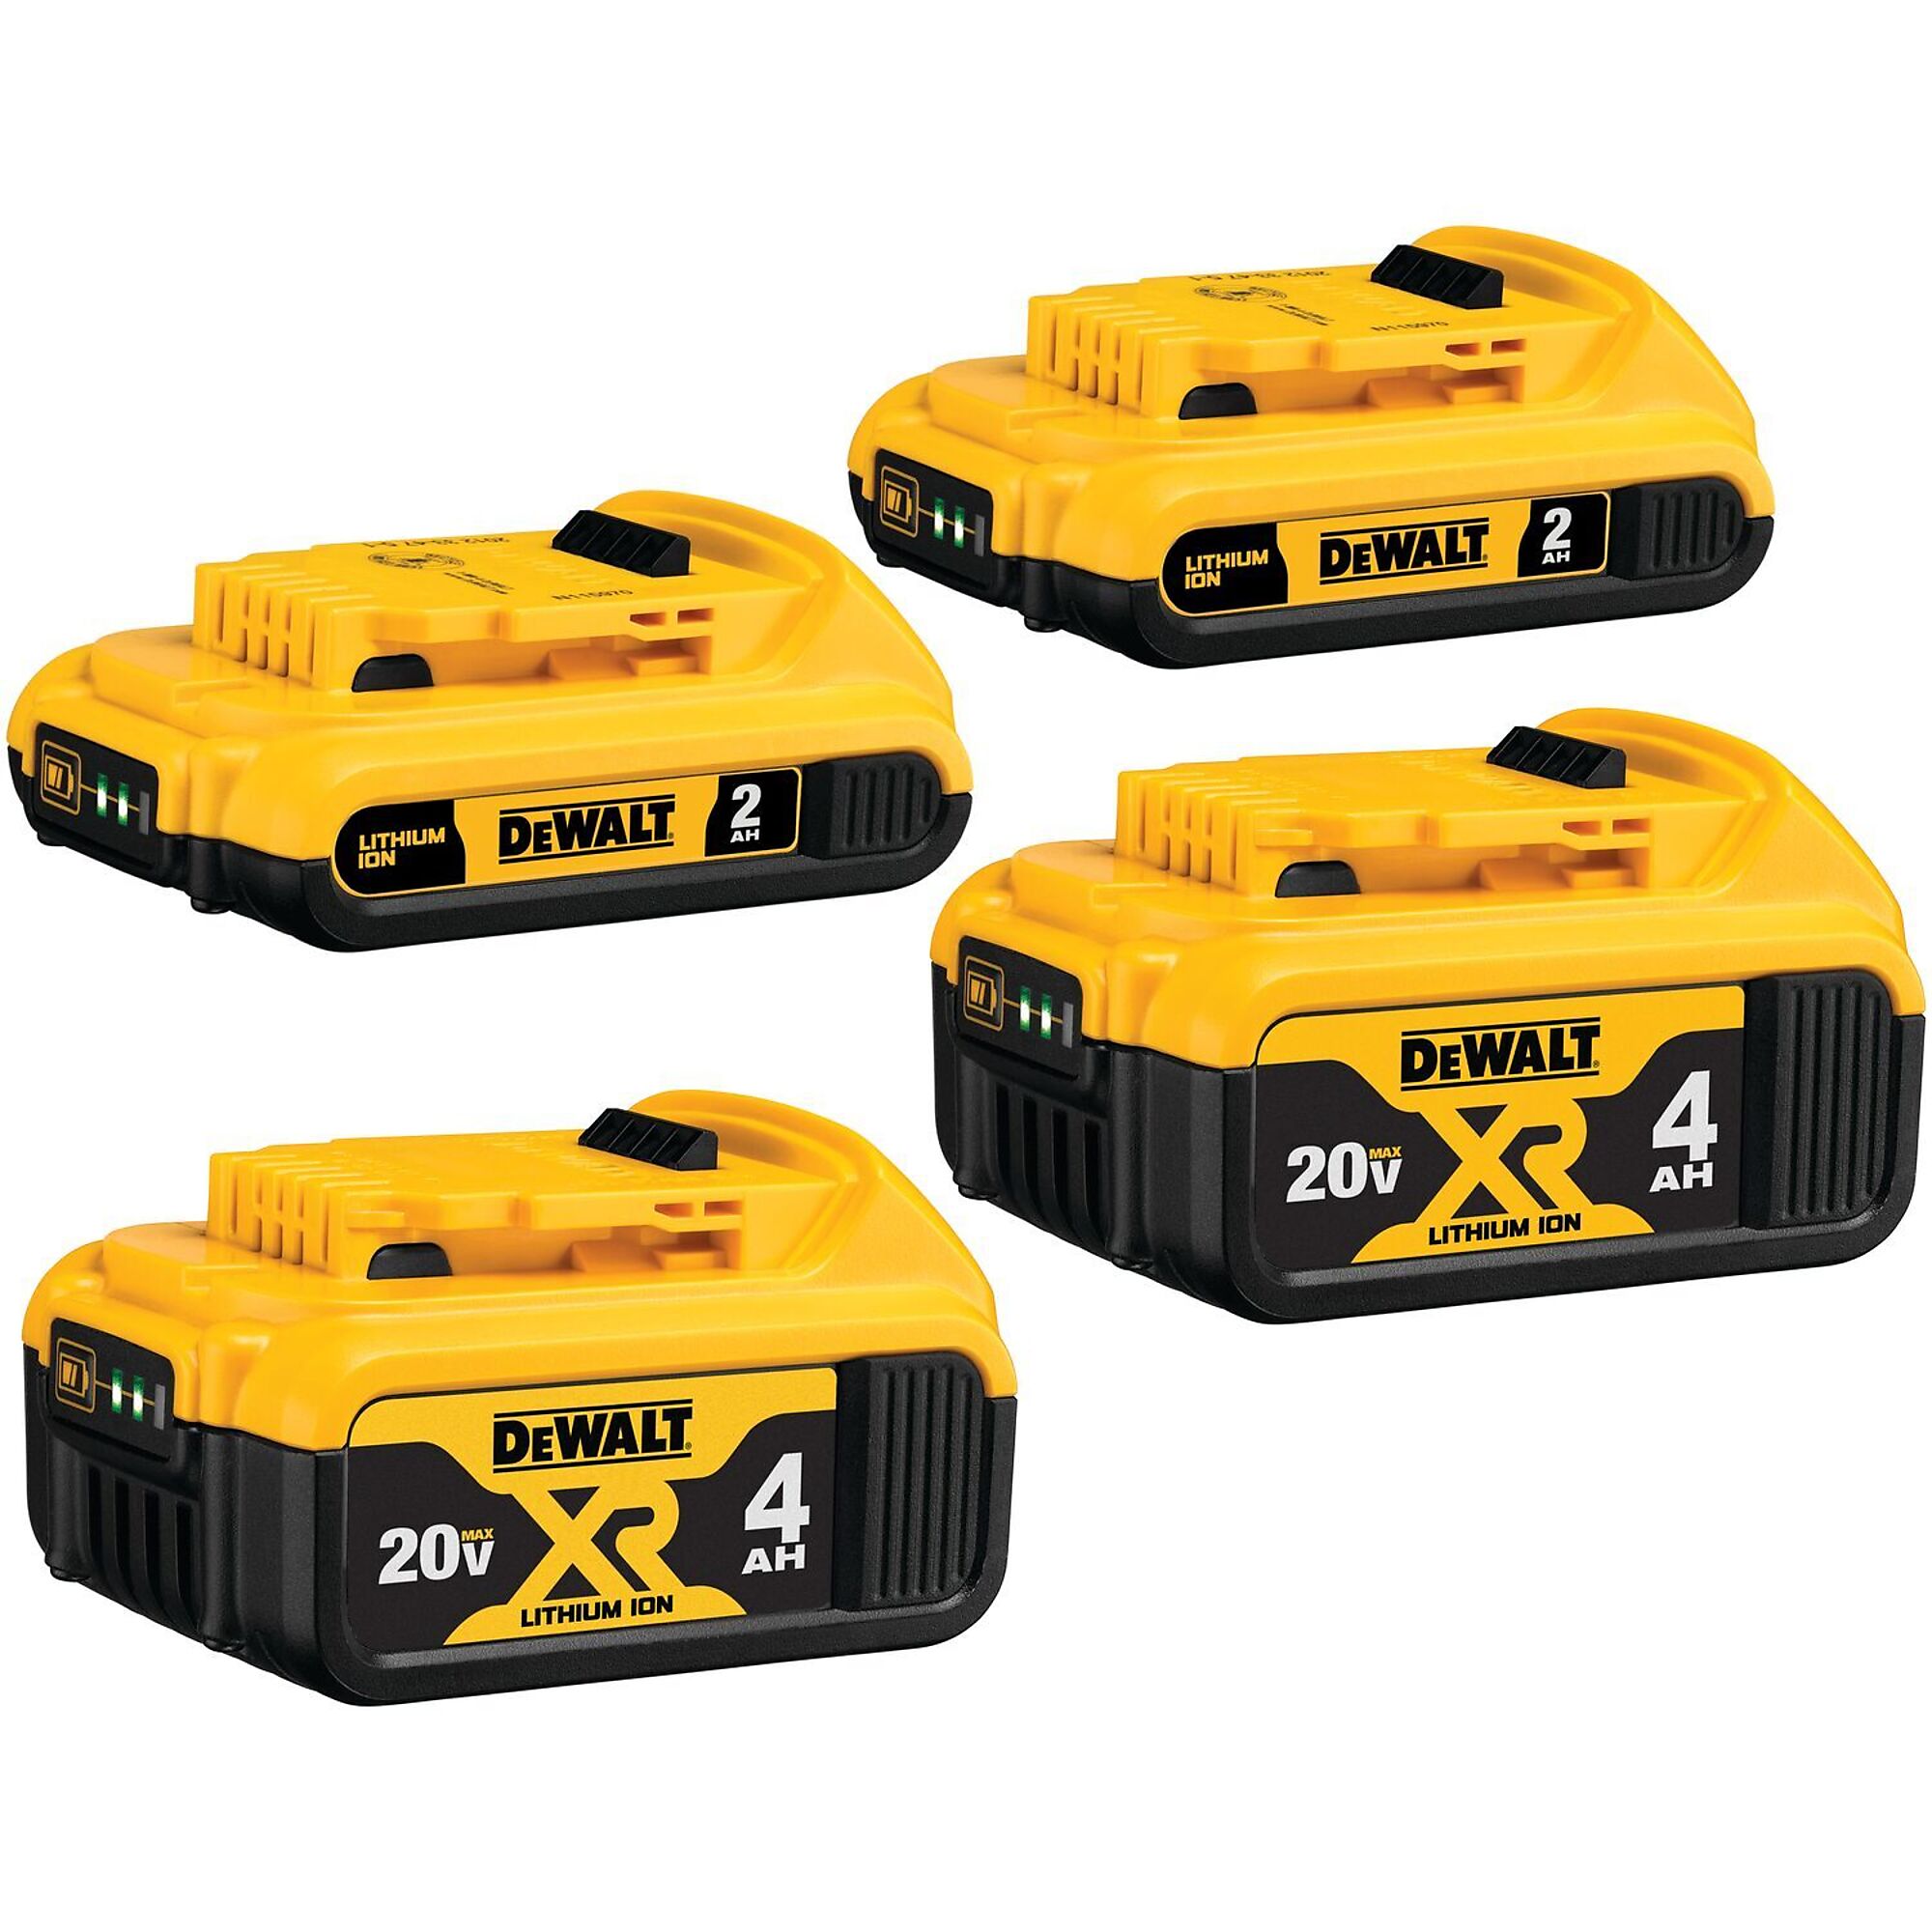 DEWALT, 20V MAX* Lithium-Ion BAT 4 PACK (2-4.0 AH and 2-2.0 AH), Volts 20 Battery Type Lithium-ion, Batteries (qty.) 4 Model DCB324-4